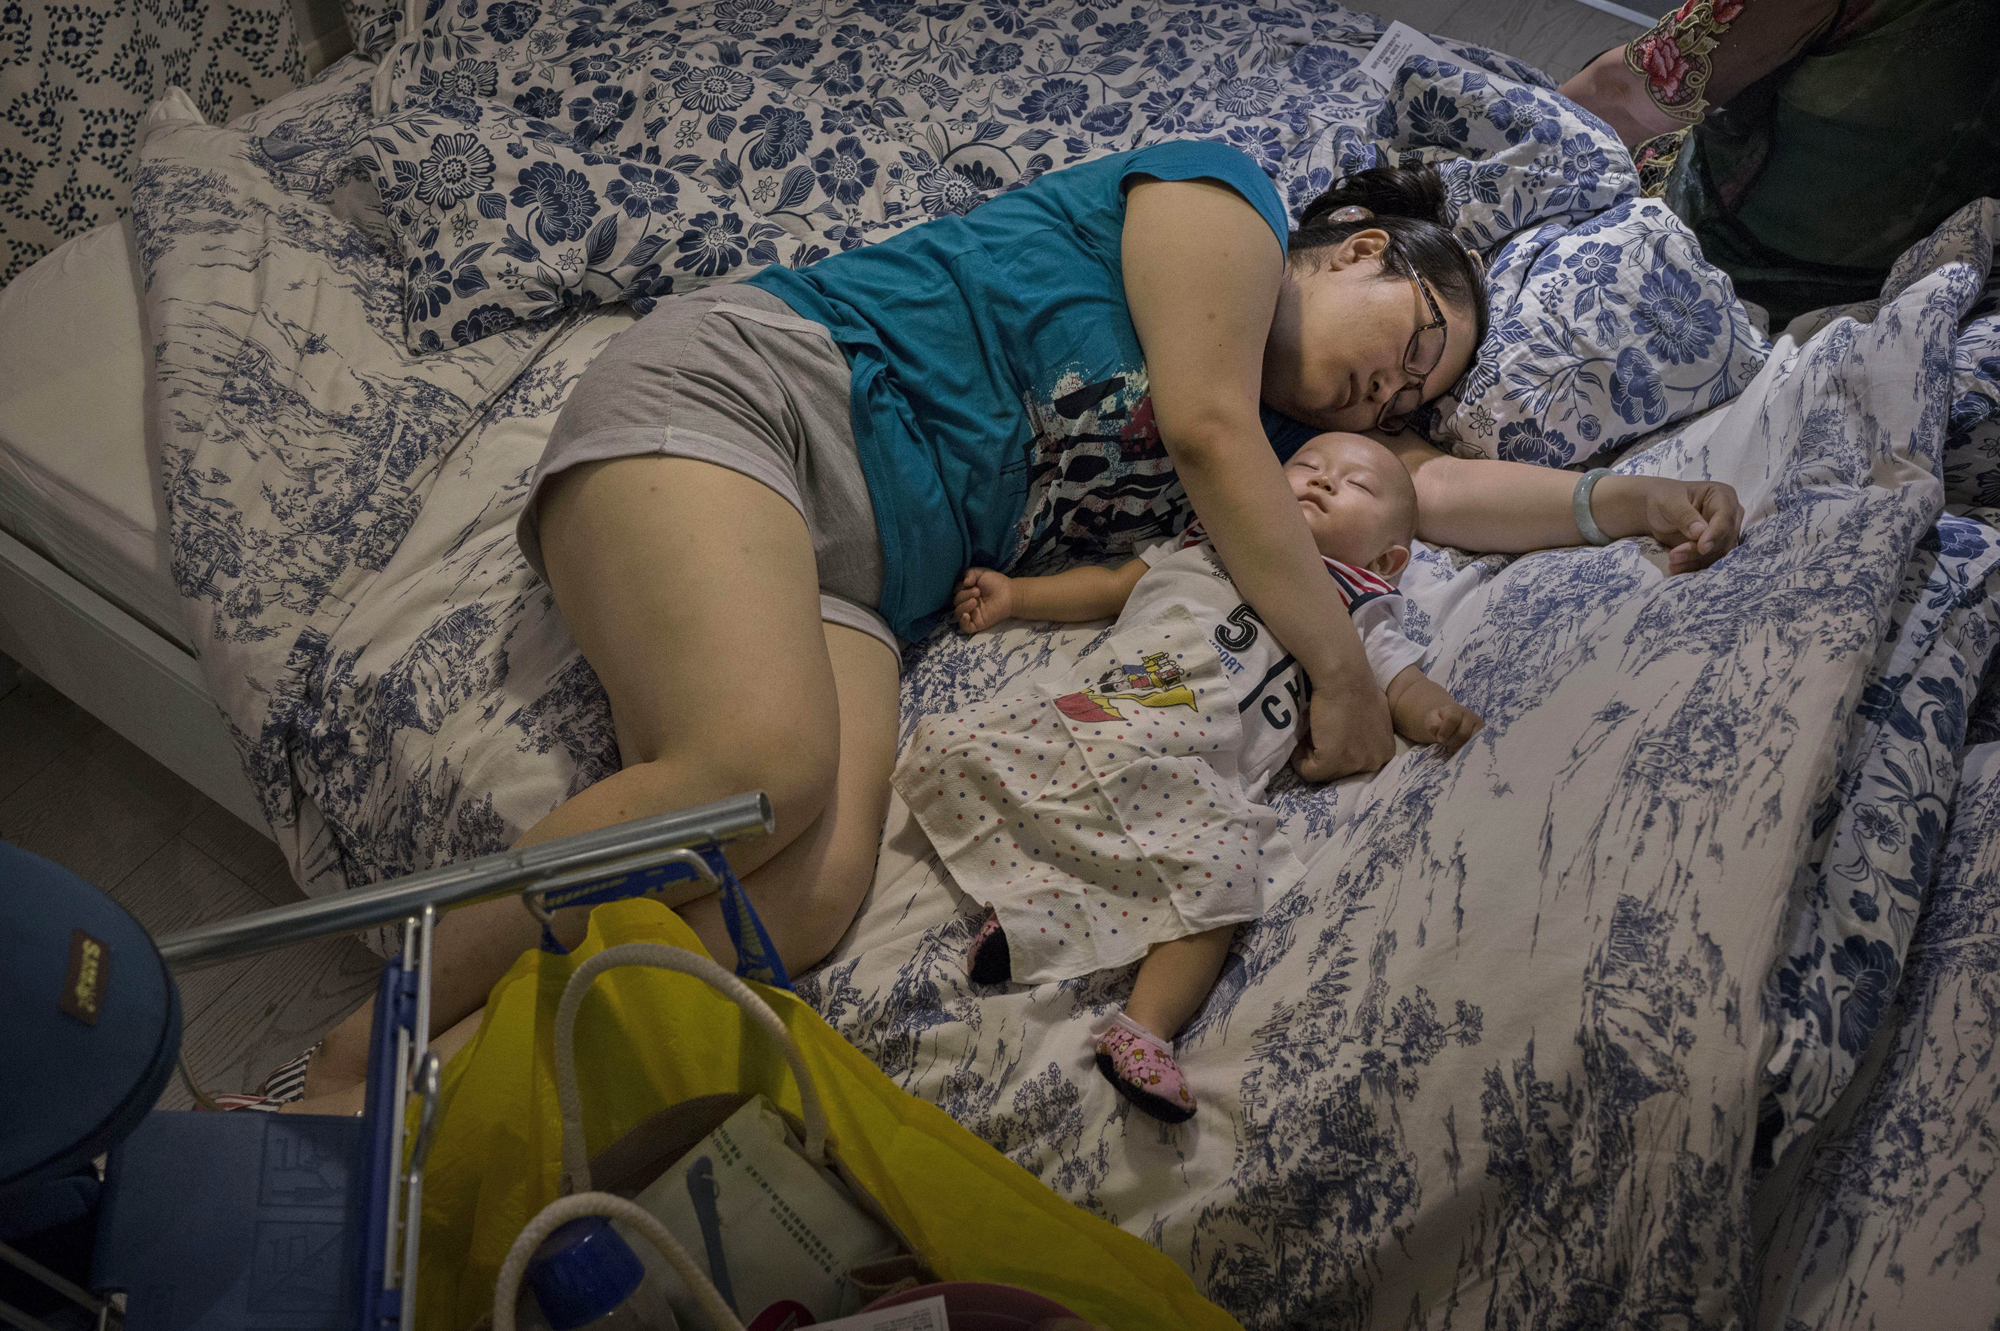 A shopper sleeps with her child on a bed in the showroom of the IKEA store on July 6, 2014 in Beijing.